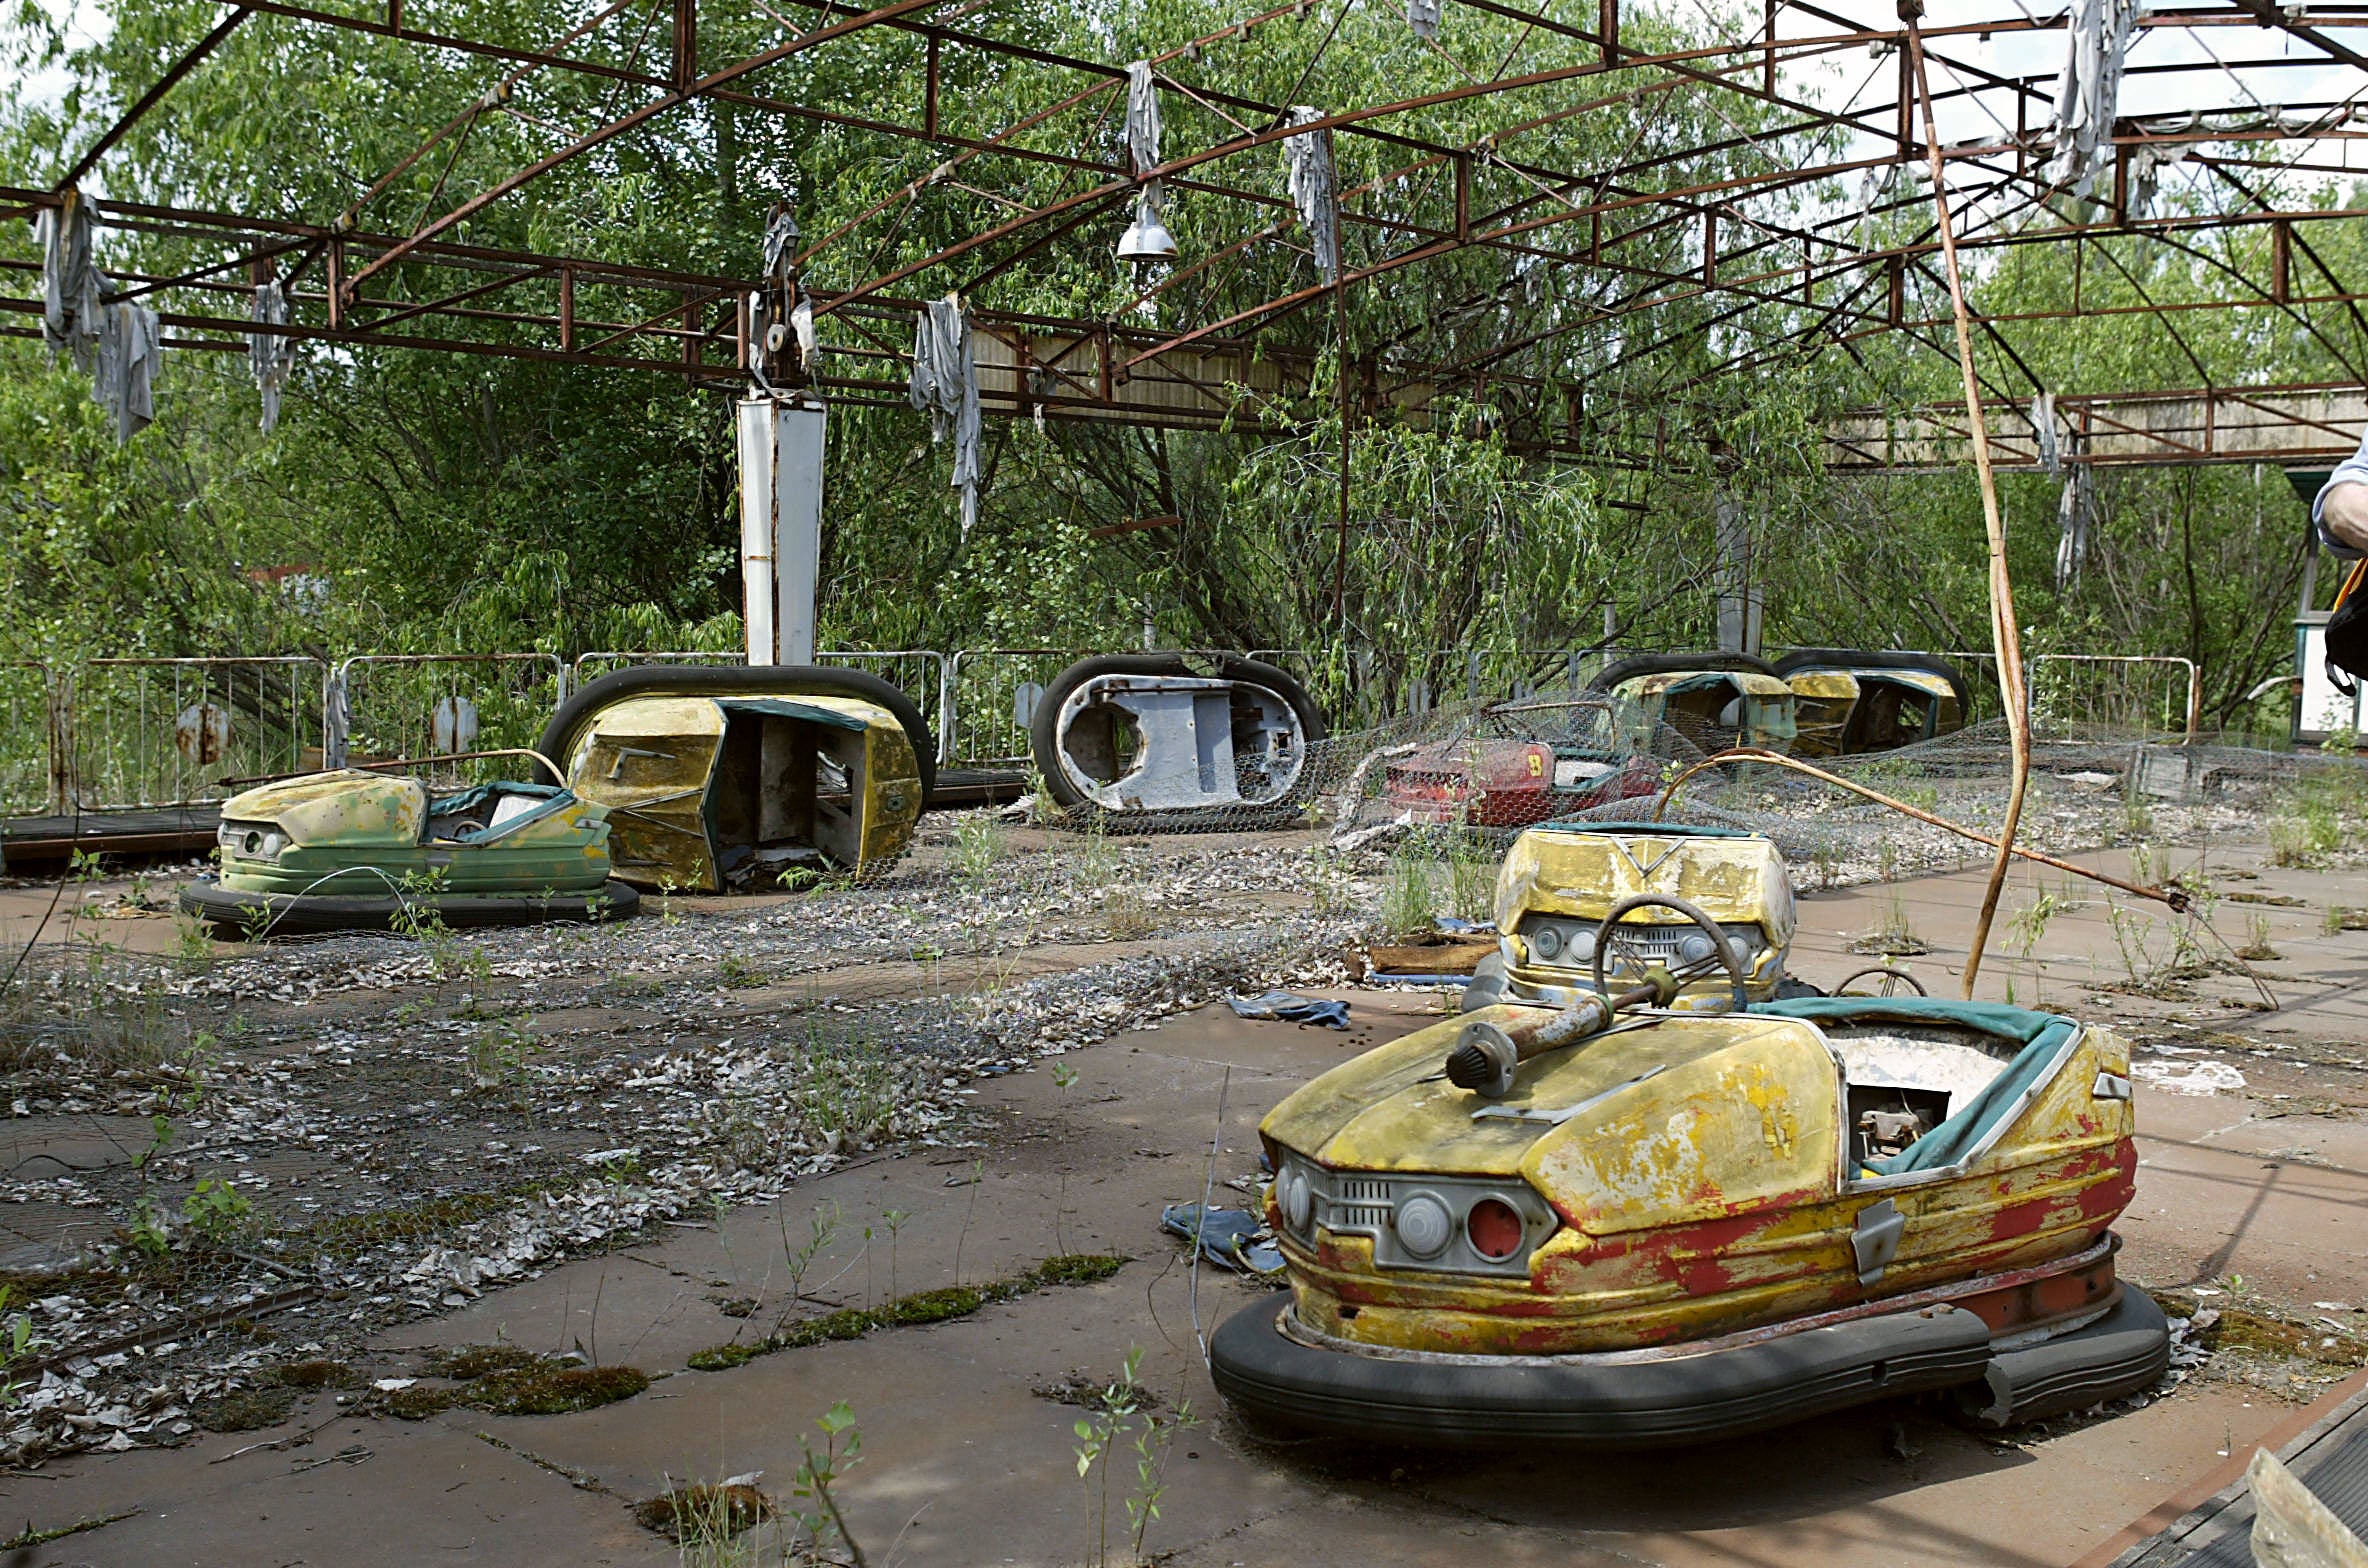 The abandoned fairground in Prypyat, adjacent to the Chernobyl nuclear disaster site